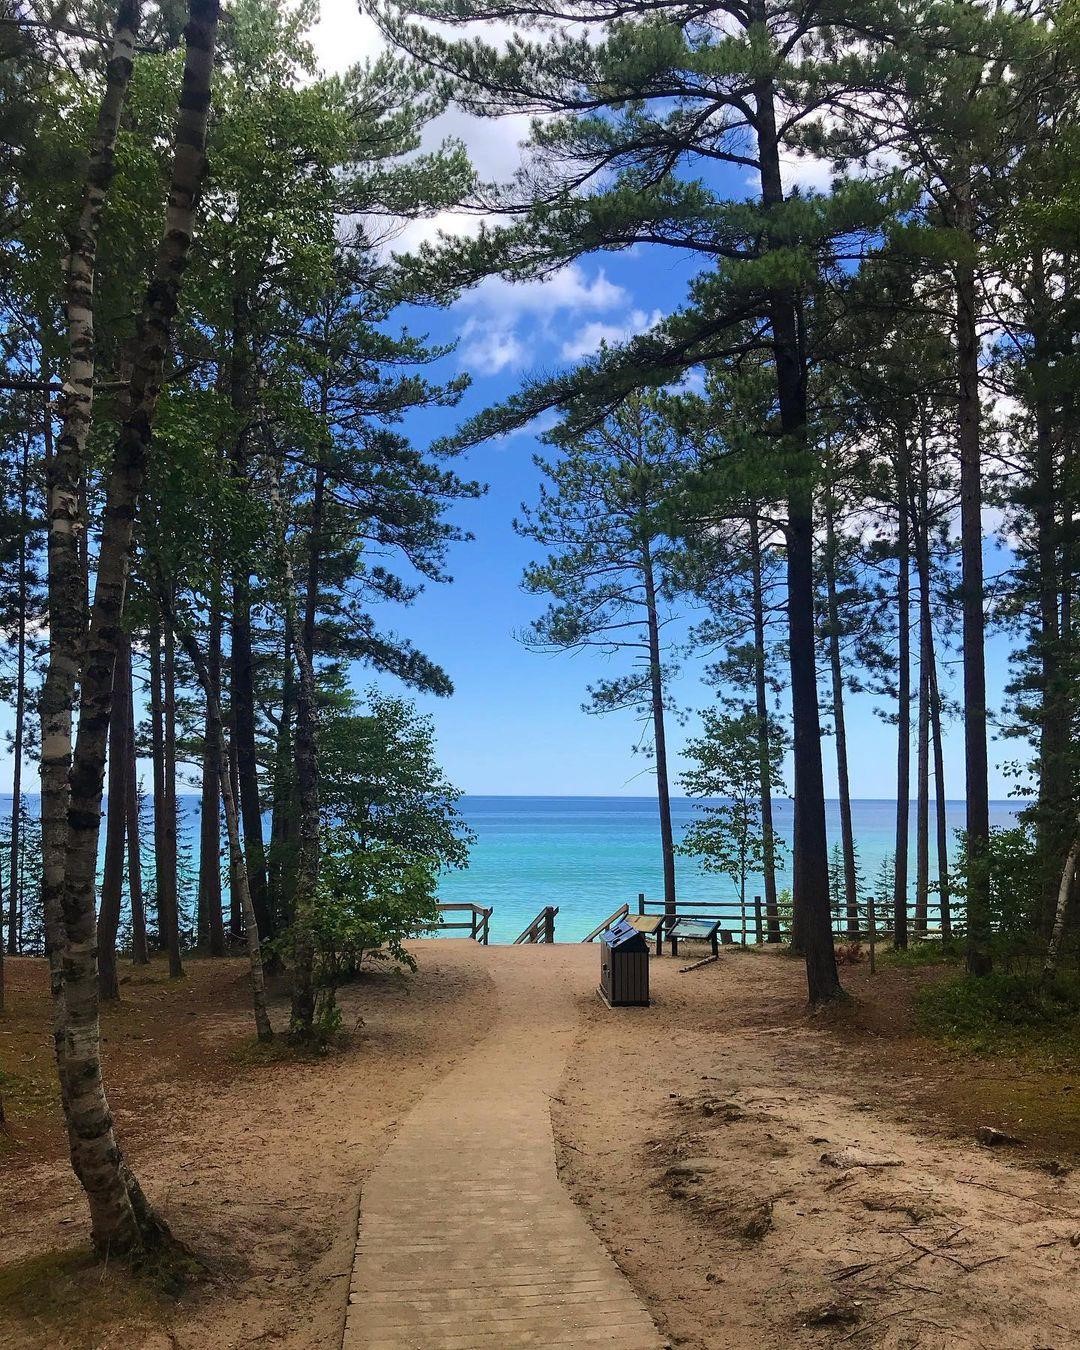 The trail to Miners Beach. PC: Instagrammer @dstill07